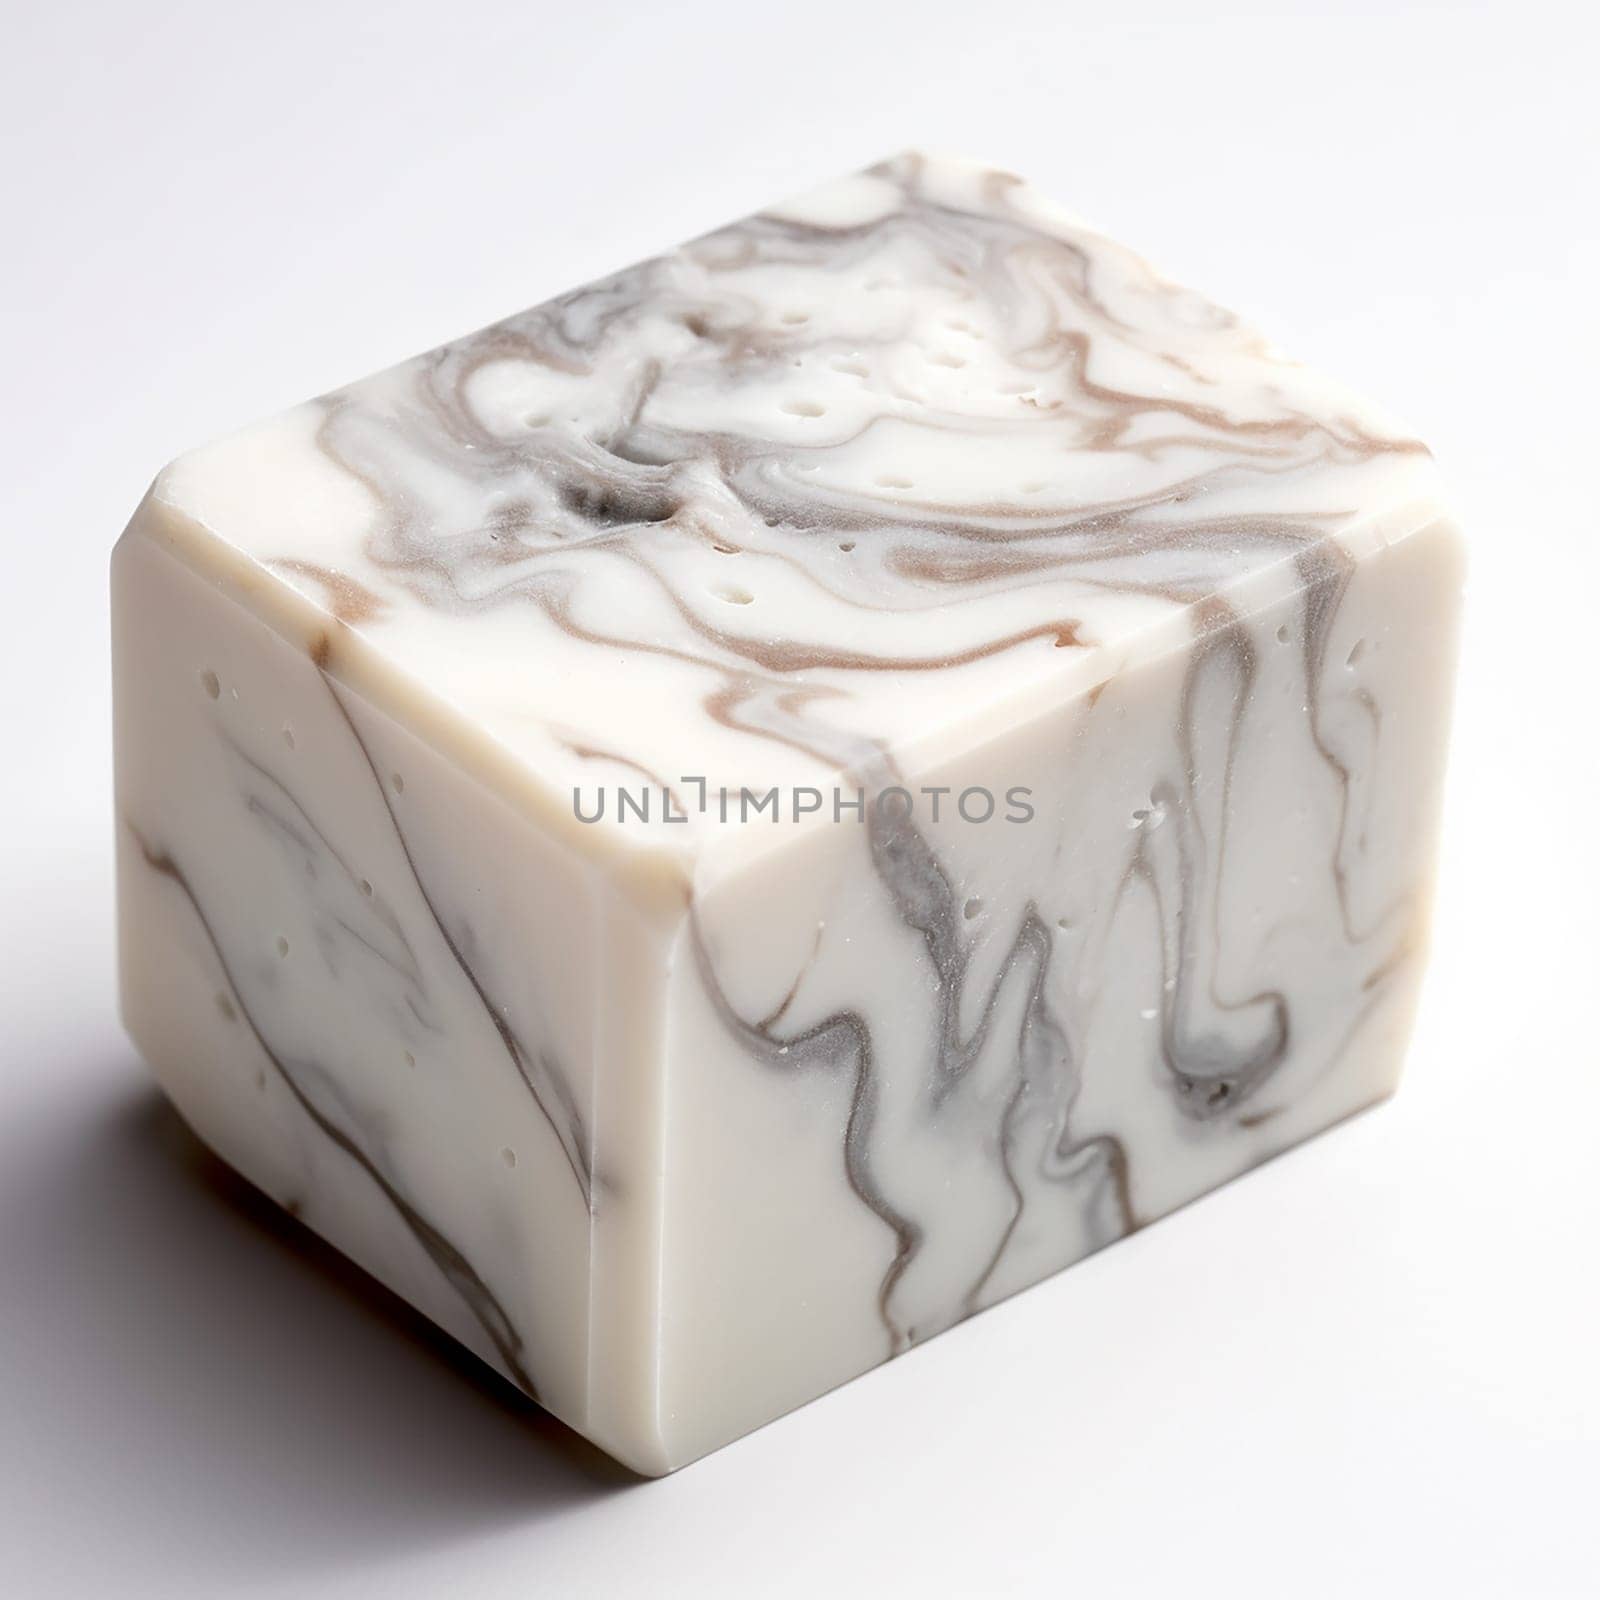 A piece of soap with a white and gray marble design. by Hype2art